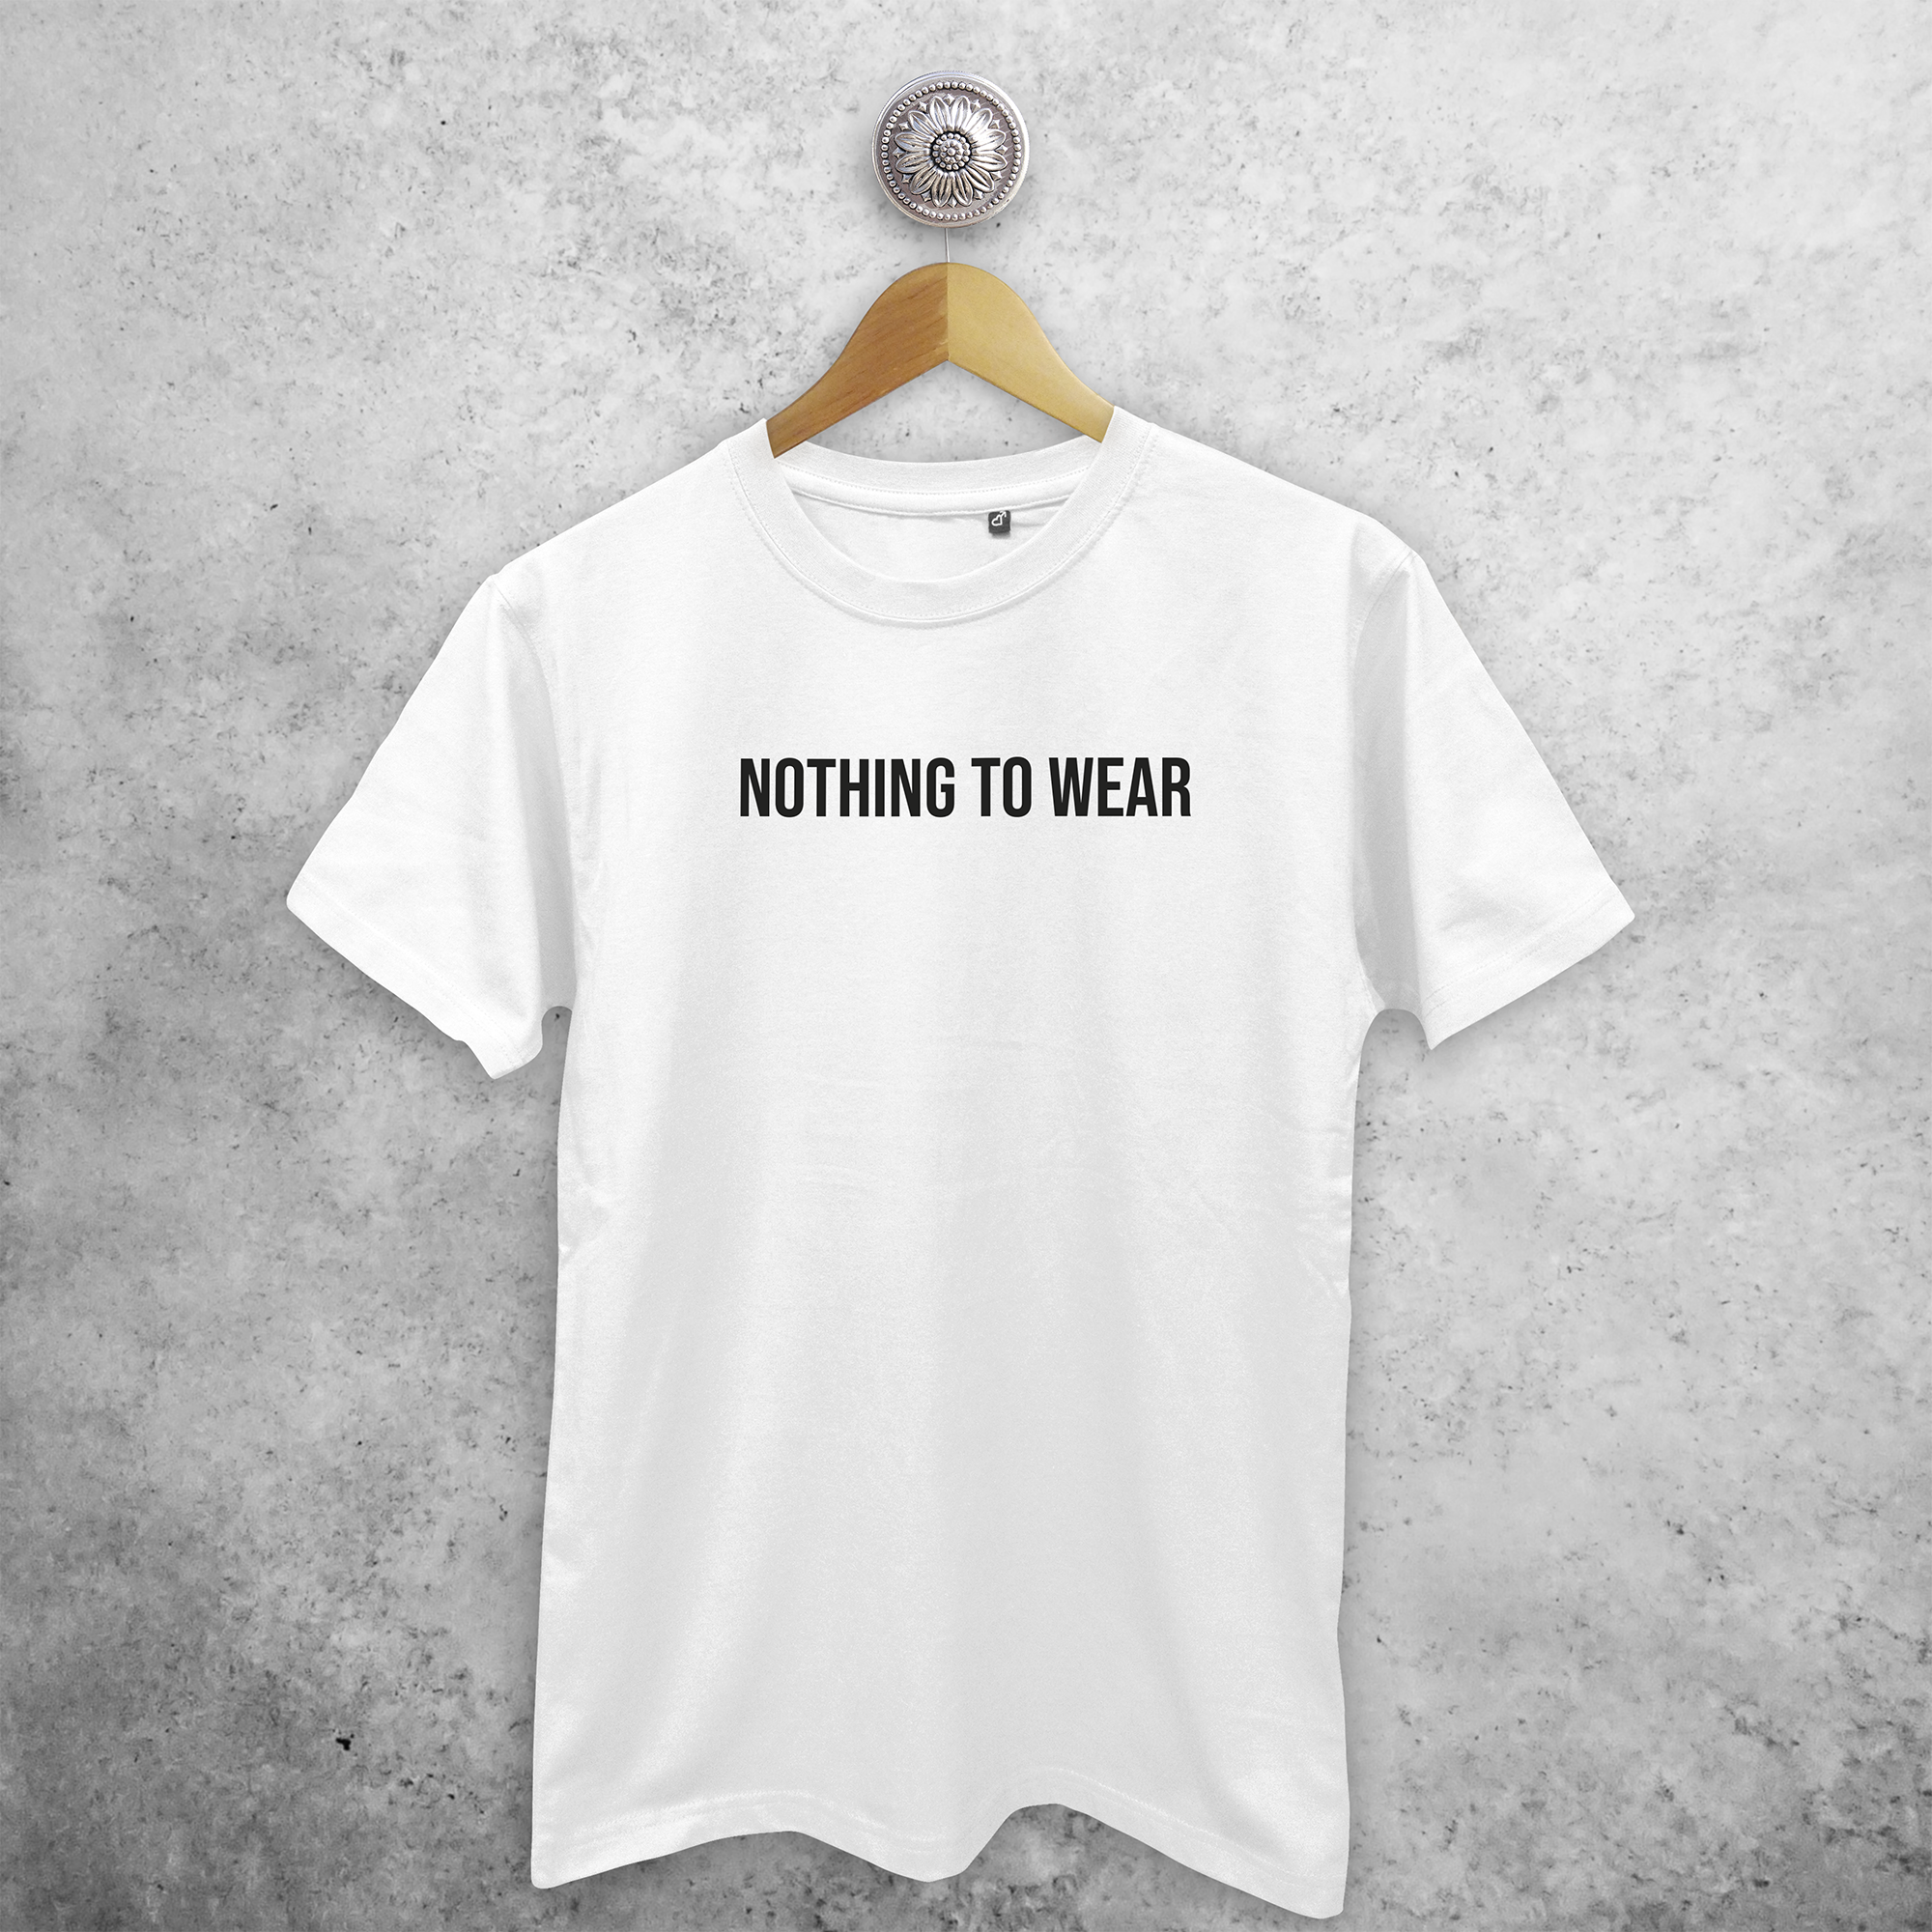 'Nothing to wear' adult shirt